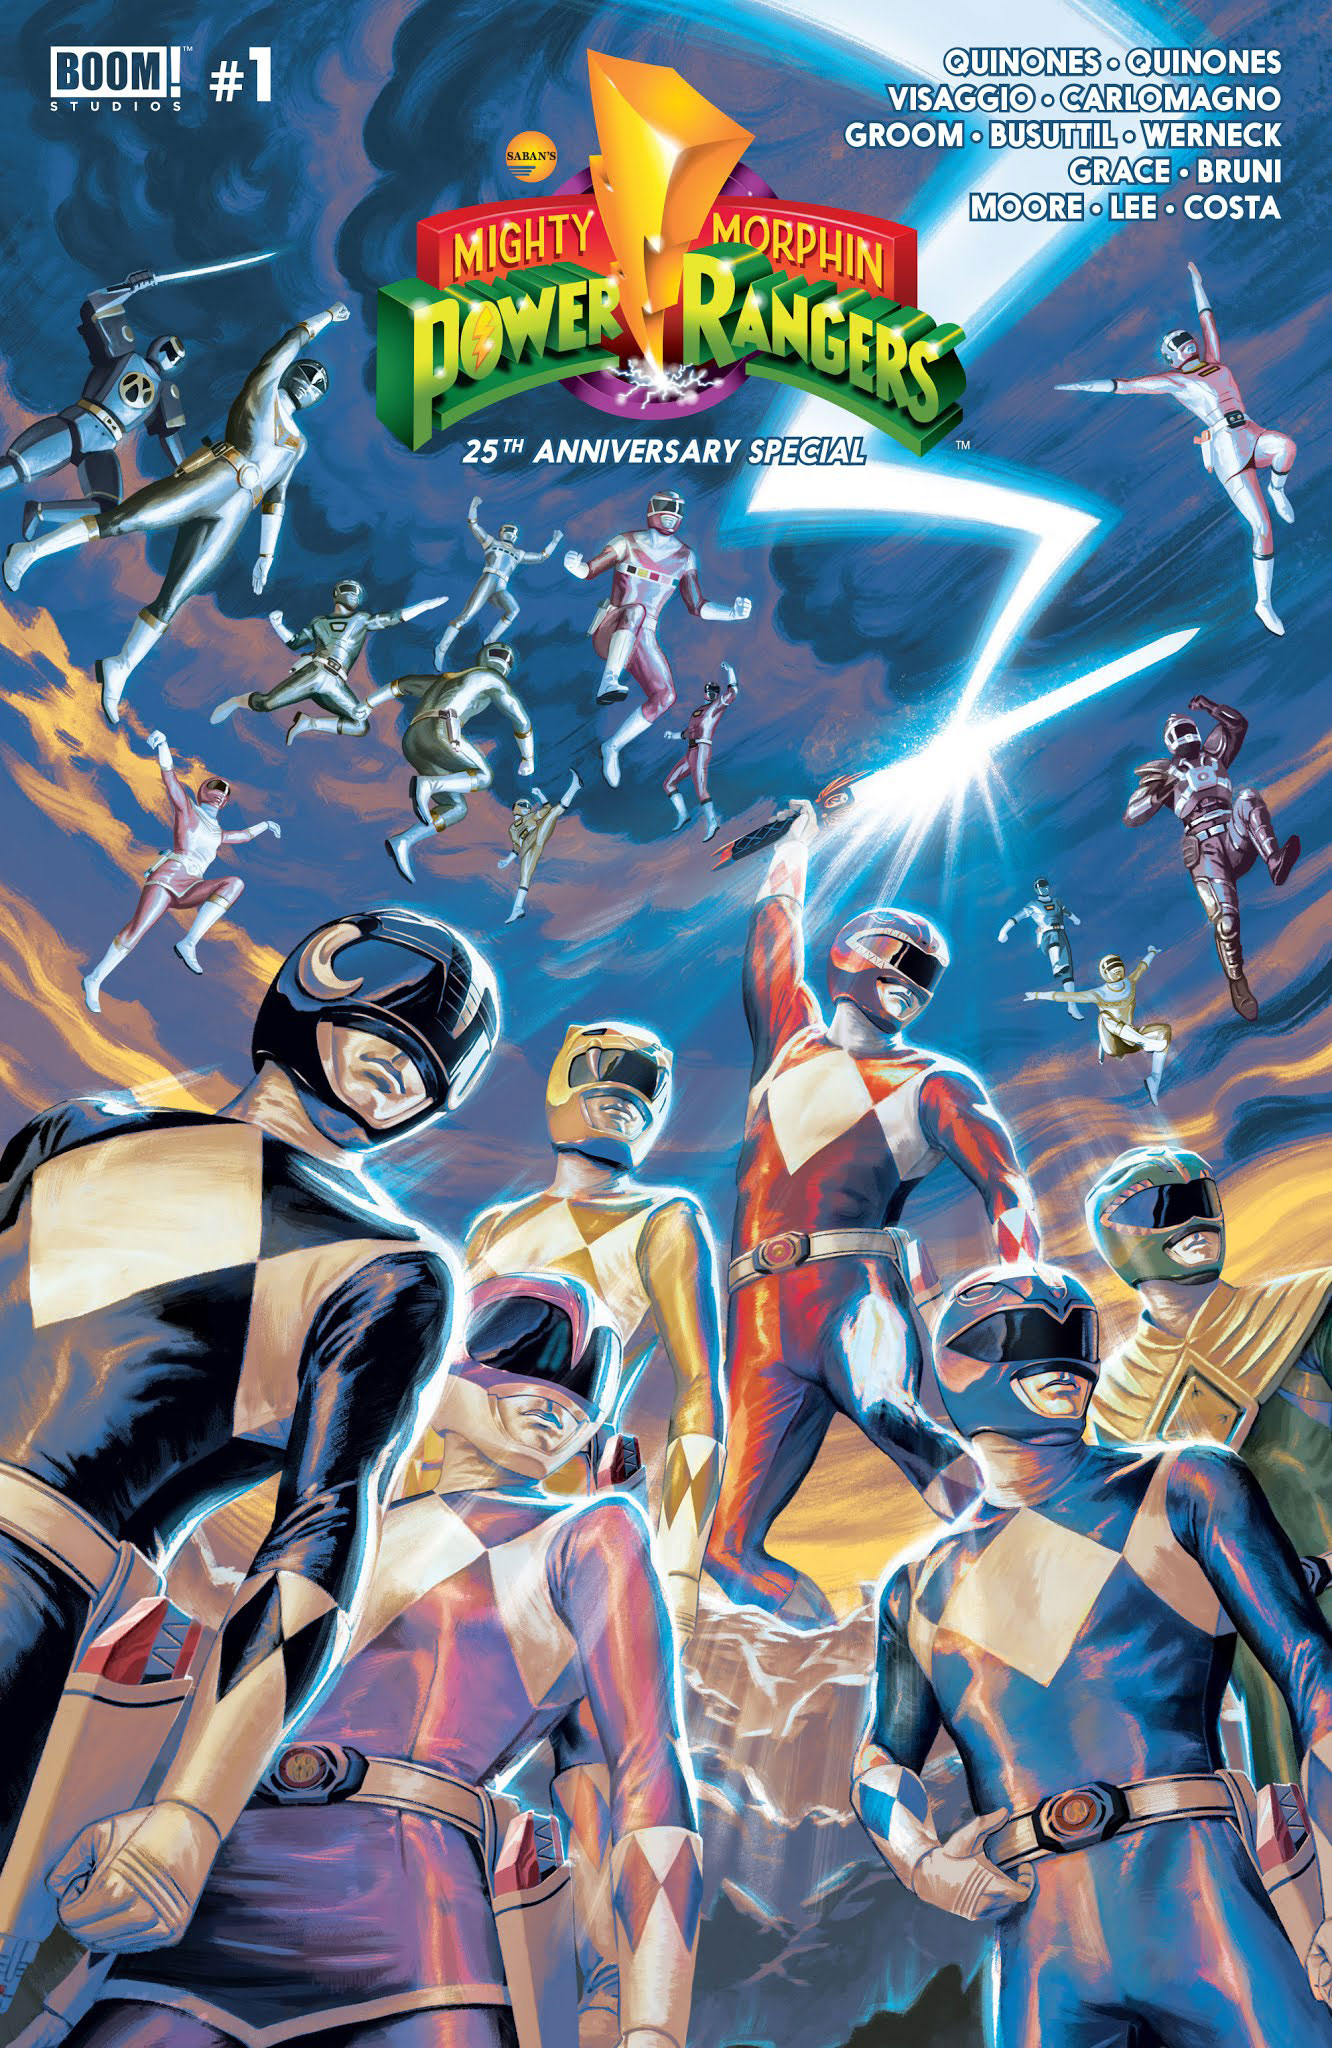 08-07-2018_16-16-07_mighty-morphin-power-rangers-25th-anniversary-special___-1.jpg